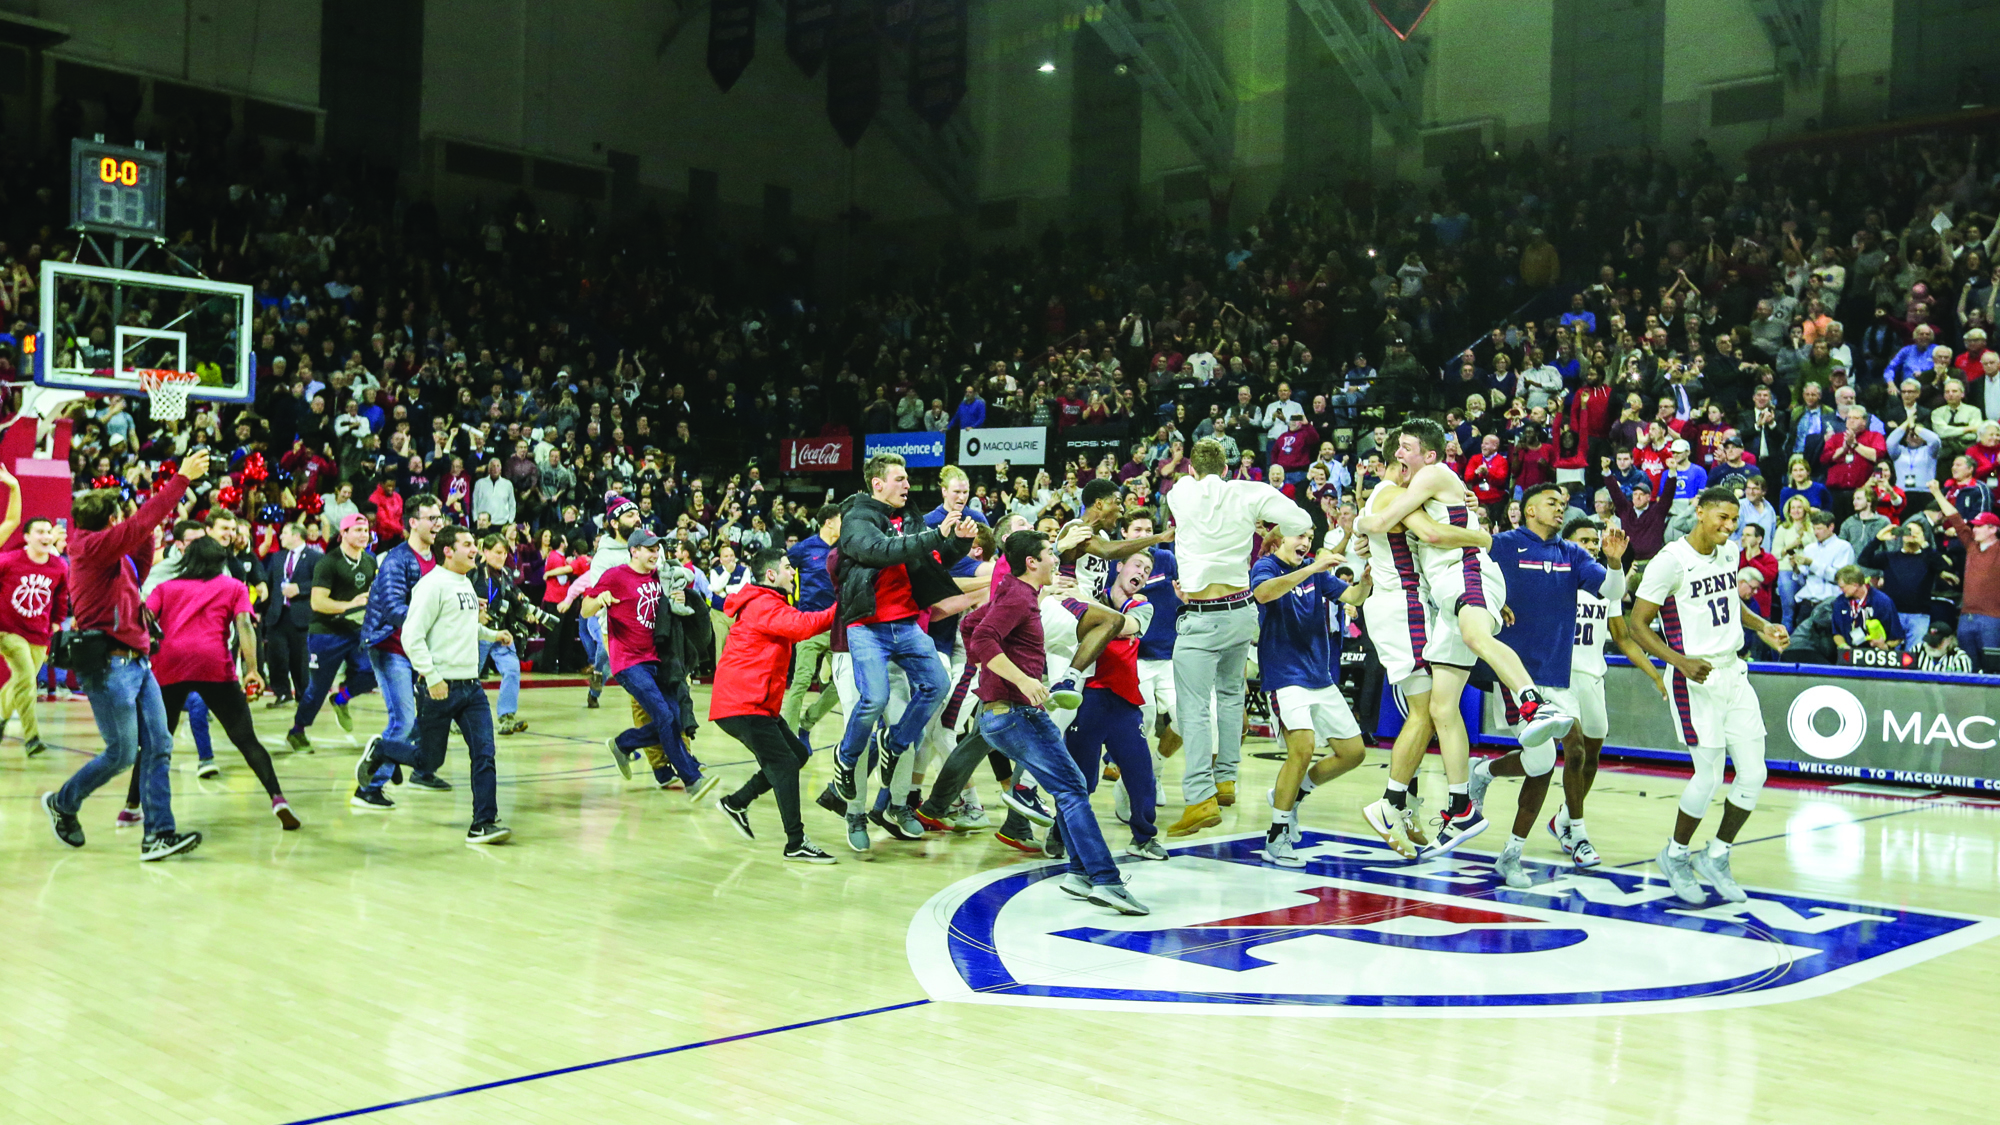 Penn players and fans rush the court after beating Villanova